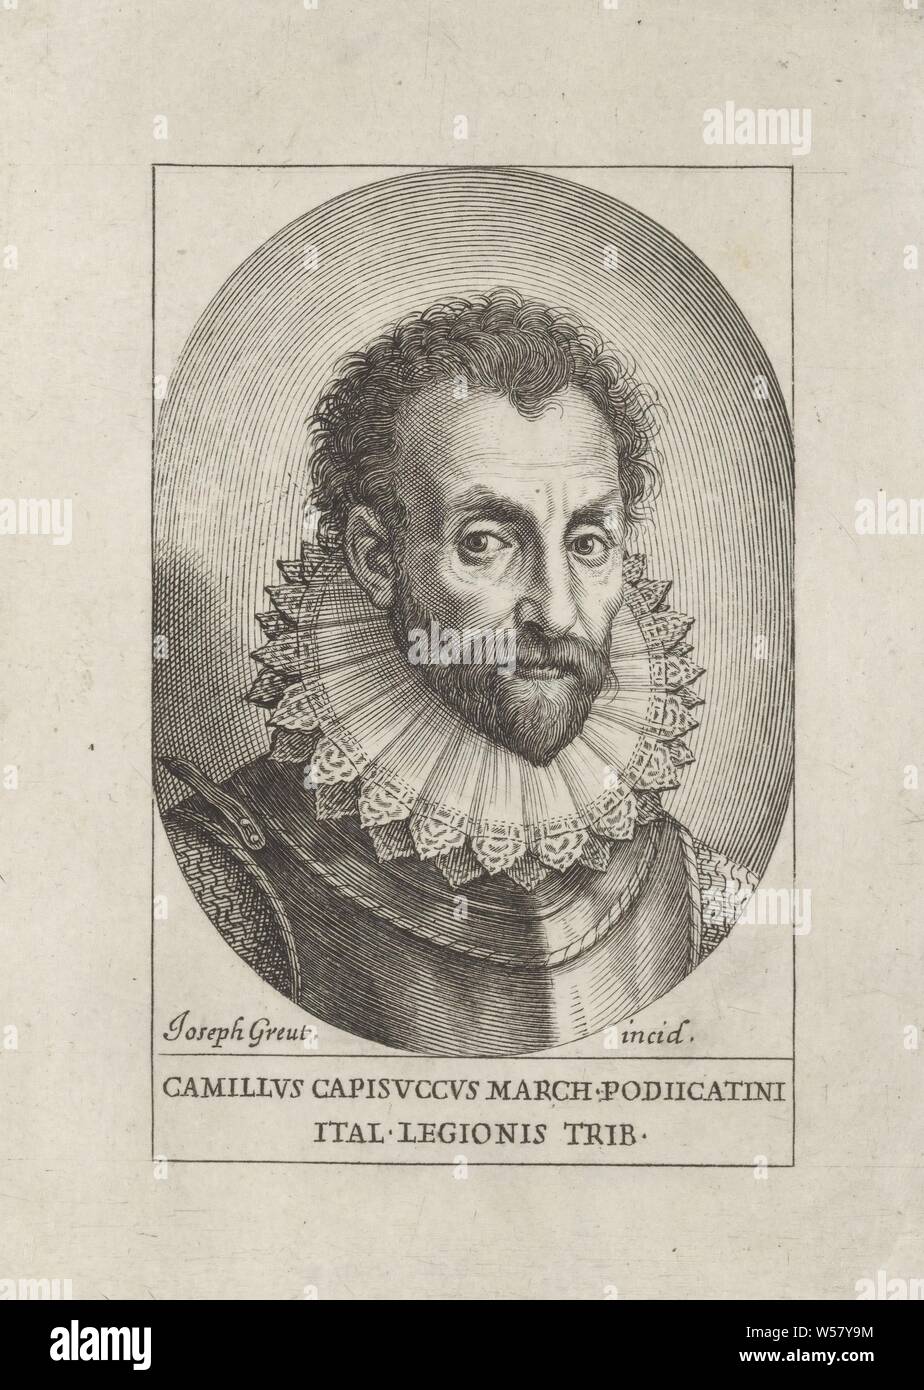 Portrait of Camillo Capizucchi Portraits (series title), historical persons, Camillo Capizucchi, Joseph Greuter (mentioned on object), Italy, c. 1650, paper, engraving, h 131 mm × w 95 mm Stock Photo